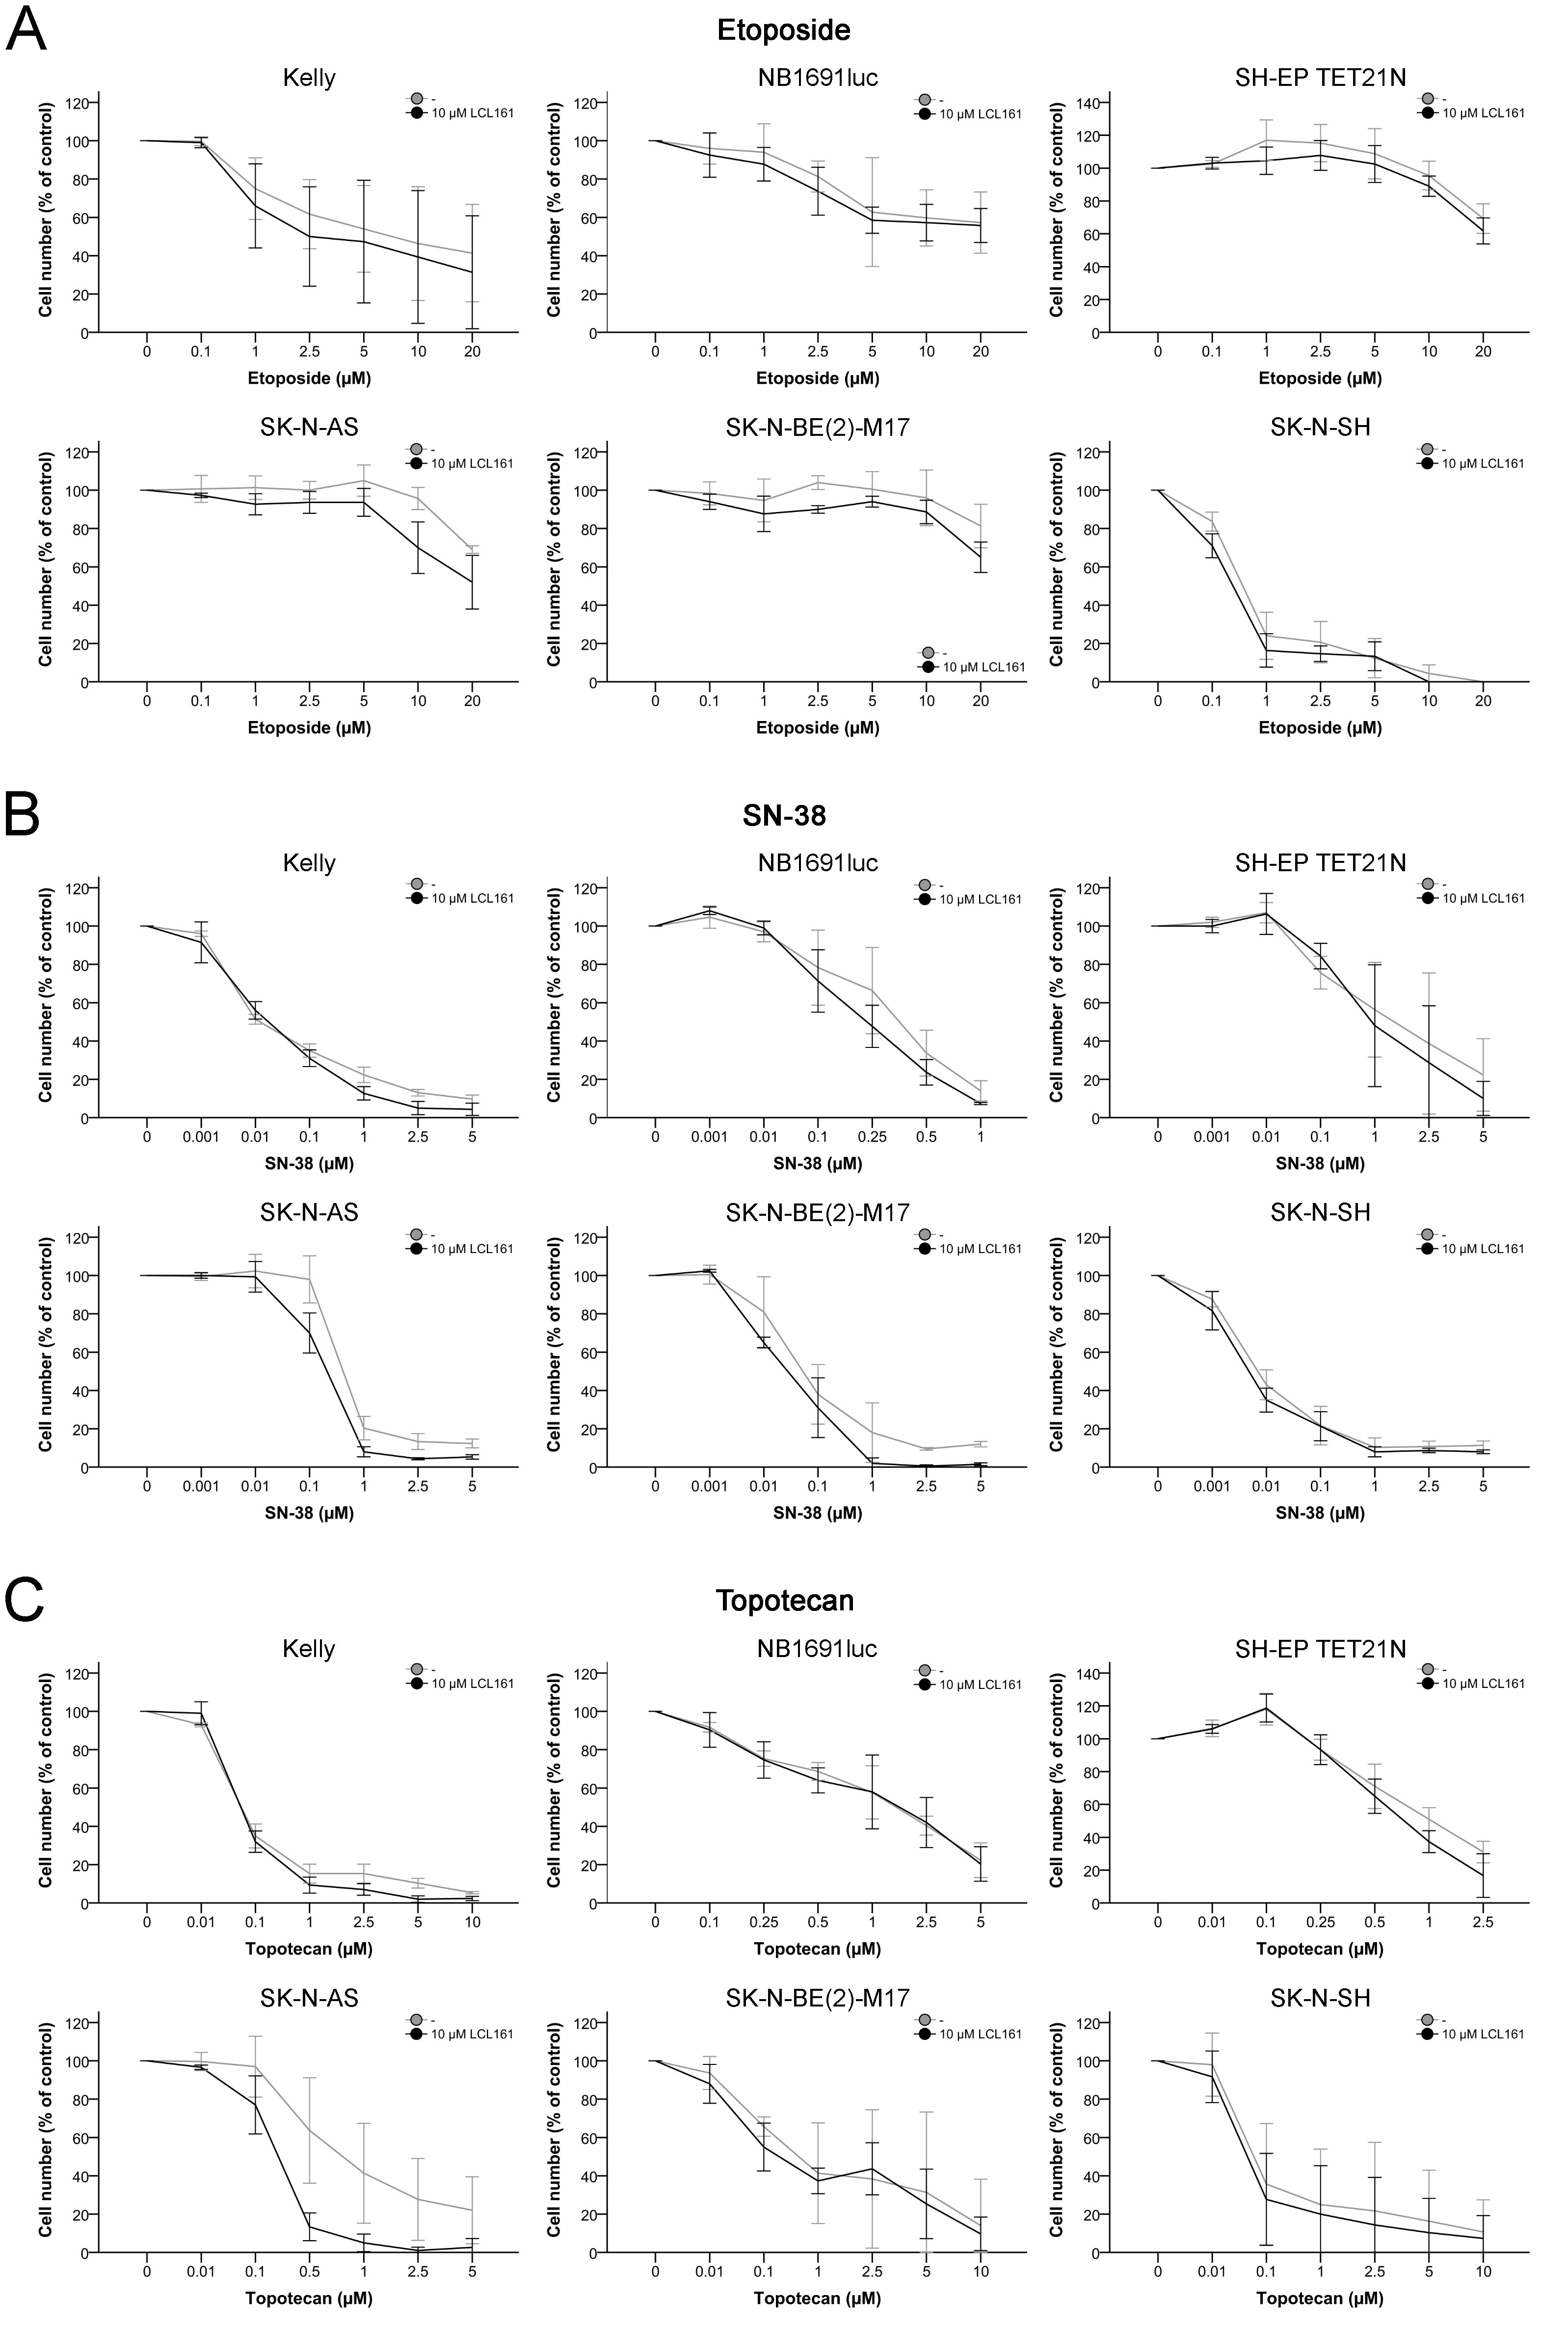 Inhibition of cell proliferation in neuroblastoma cell lines by topoisomerase inhibitors and their combination with LCL161.